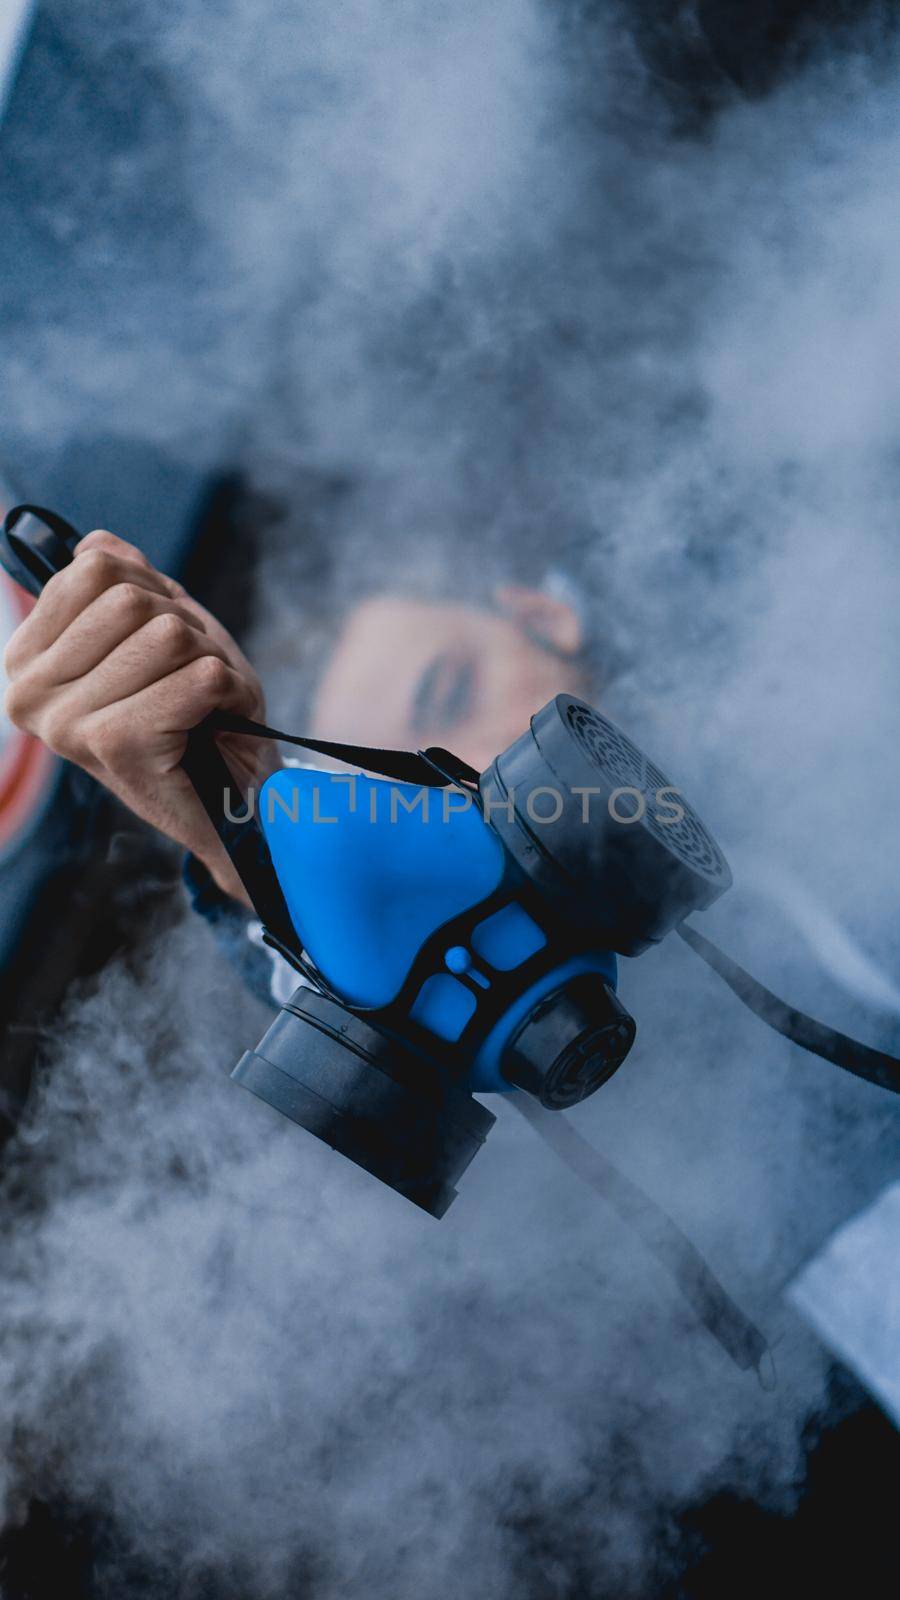 Protection respirator half mask for toxic gas.The man prepare to wear protection air pollution. Man holds a respirator, arm extended forward